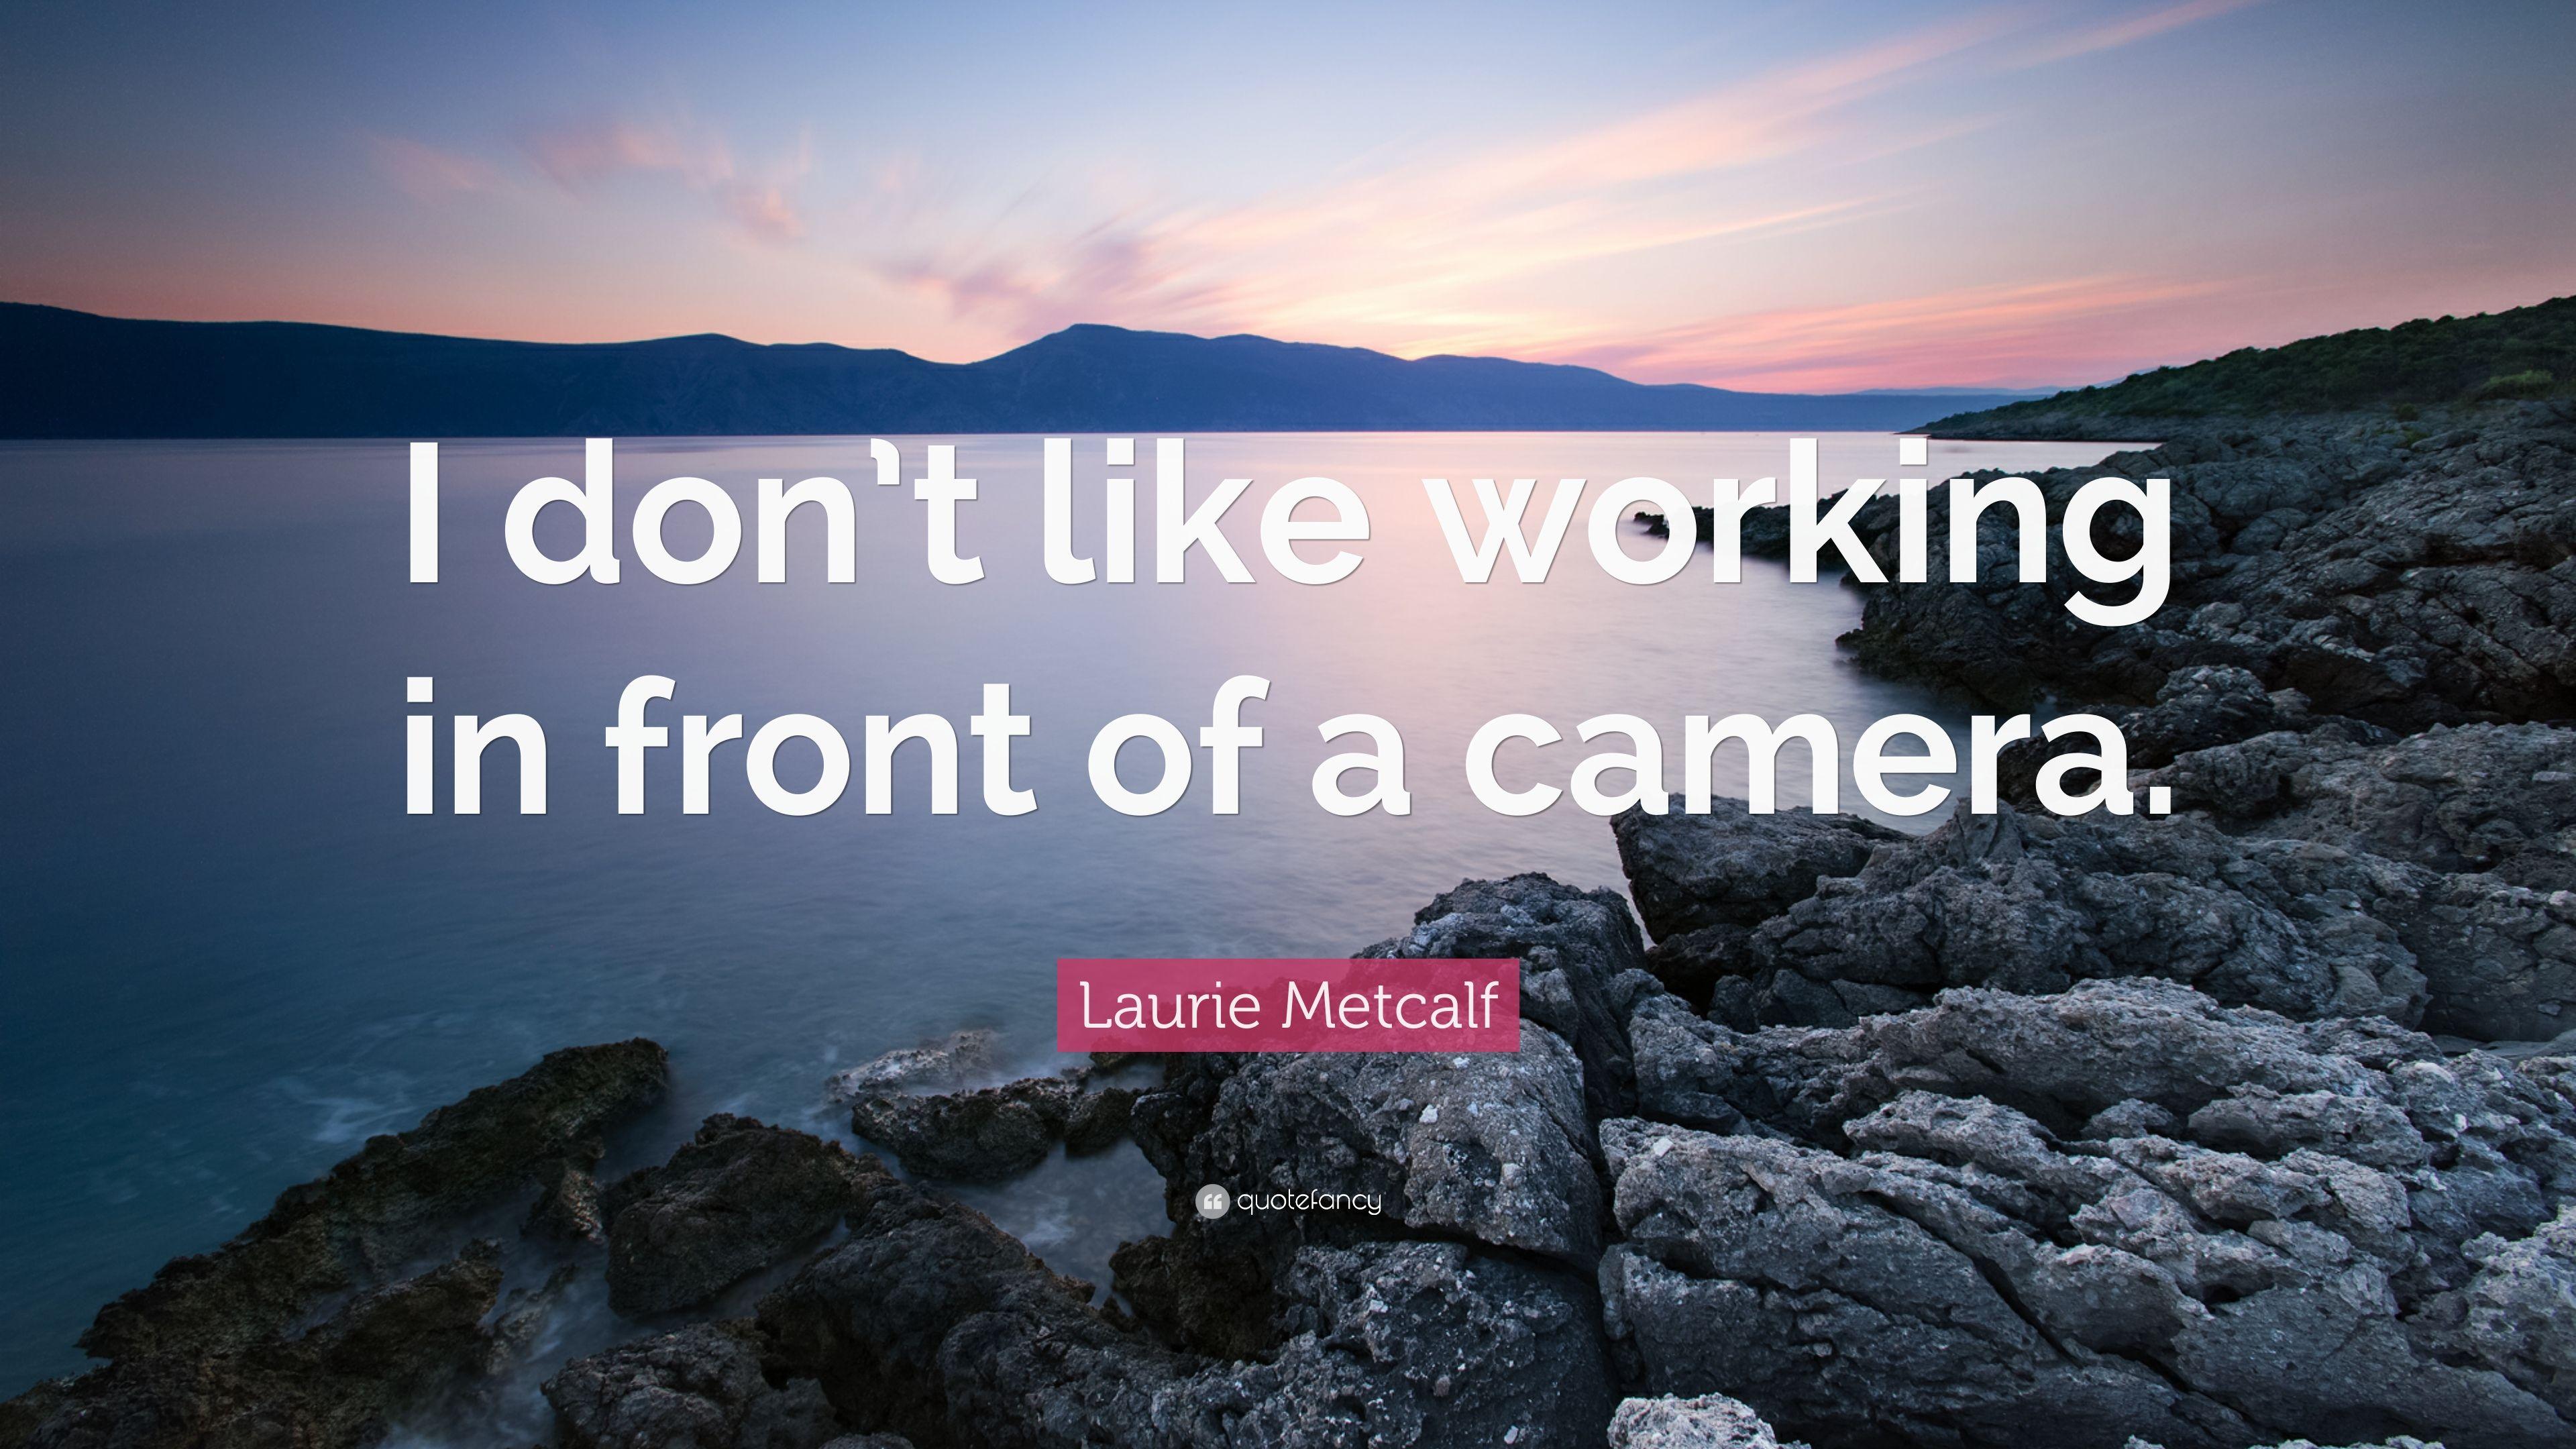 Laurie Metcalf Quote: “I don't like working in front of a camera